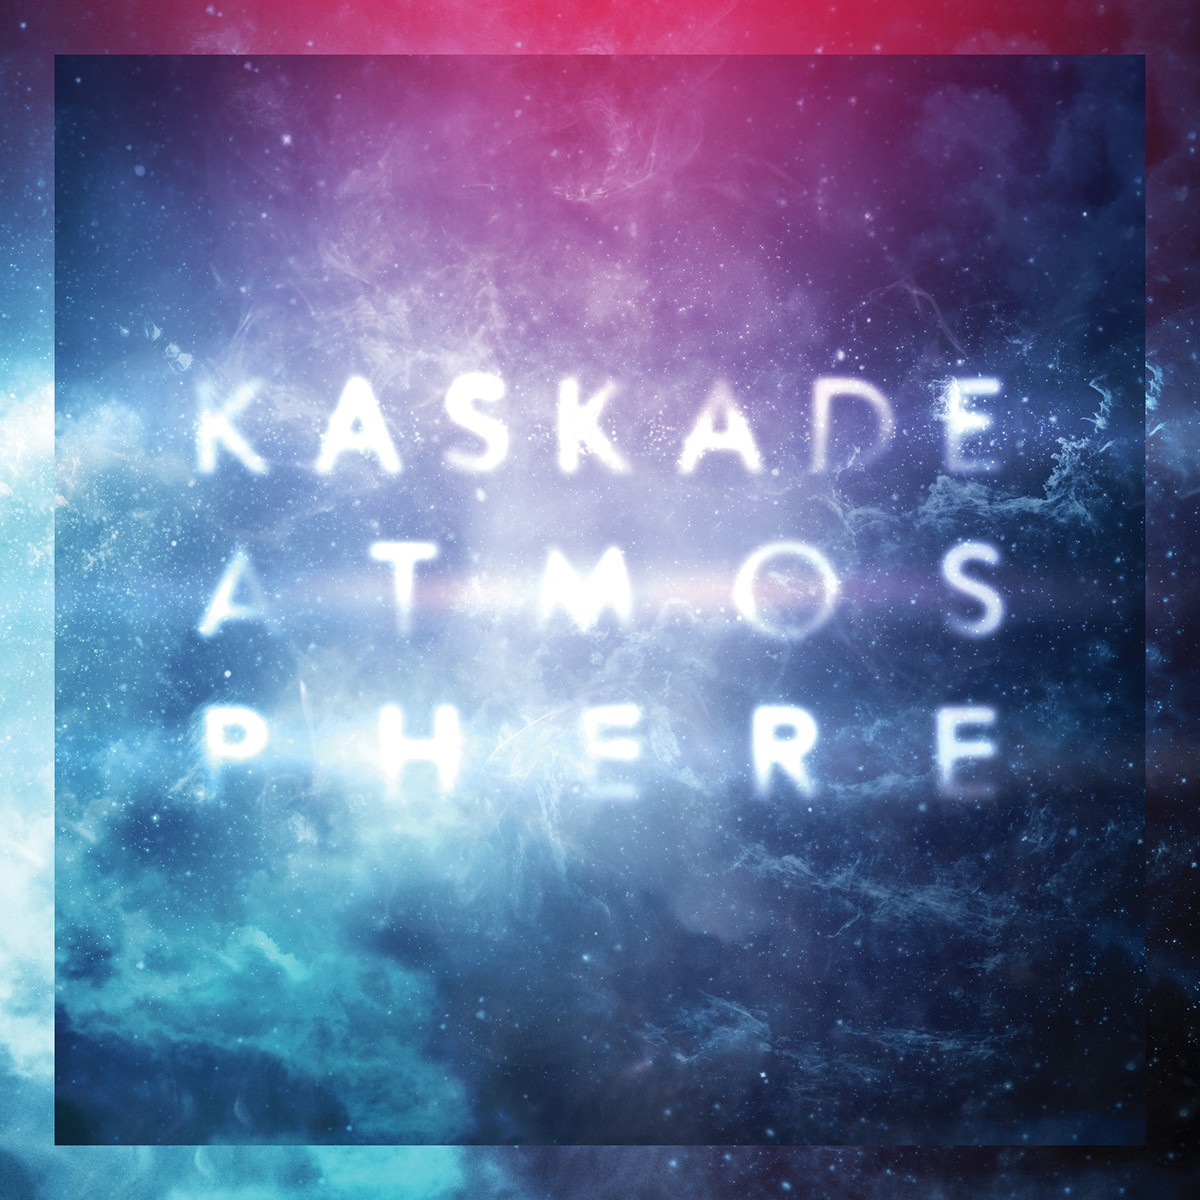 No One Knows Who We (AreKaskade's Atmosphere Mix)